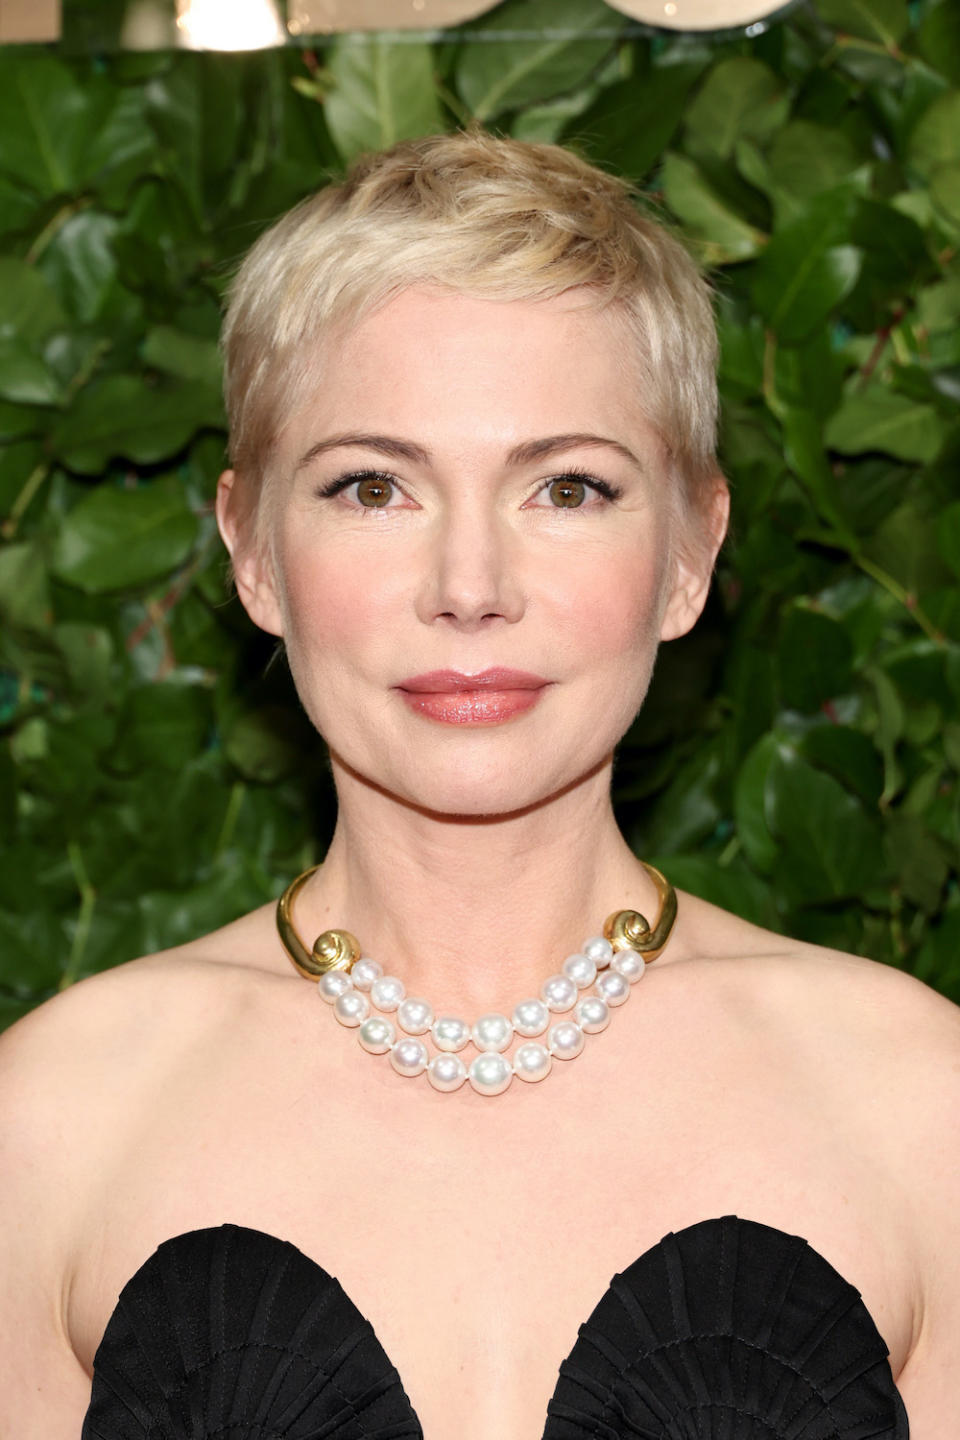 <p> The pixie cut was a very popular hairstyle in the '60s, with famous faces including Twiggy, Edie Sedgwick and Mia Farrow all sporting one during the decade. Here, actress Michelle Williams' haircut feels similar to the latter's iconic look. </p>